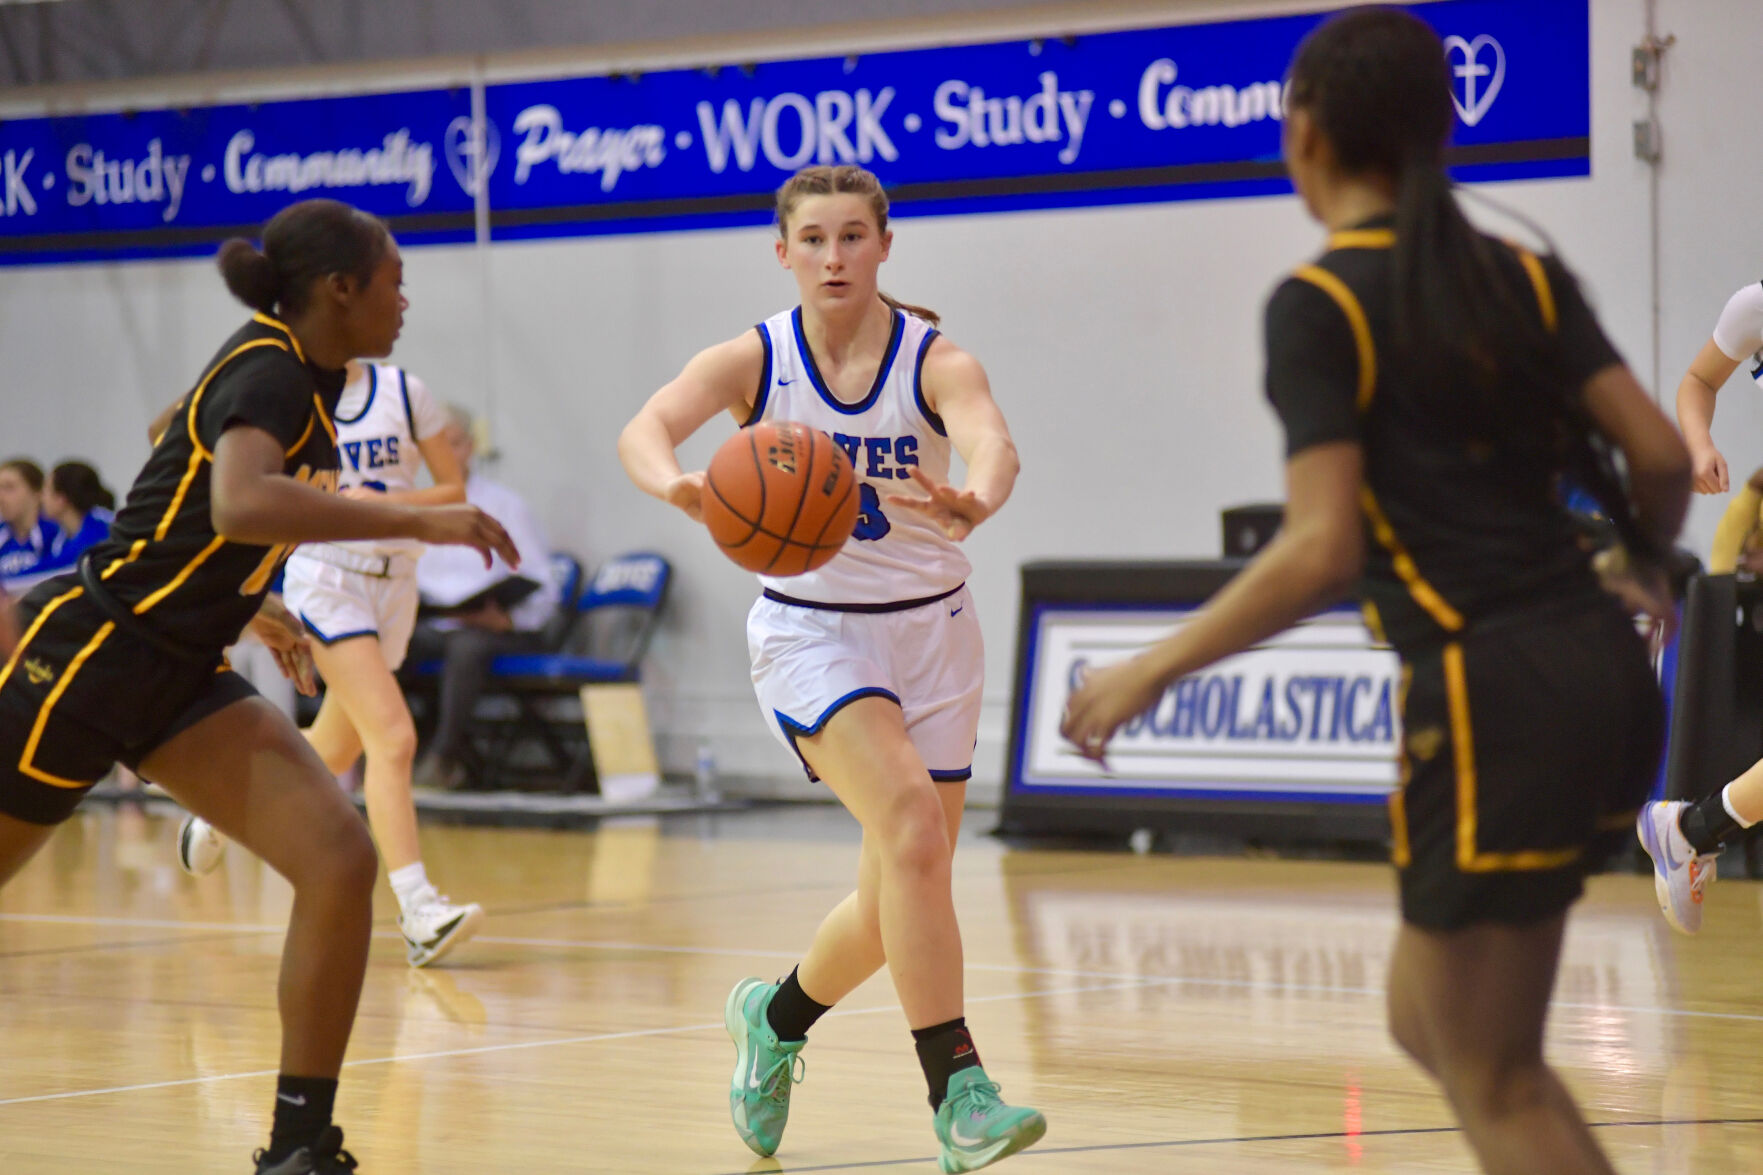 St. Scholastica Dominates with Balanced Offense and Tough Defense in Playoff Win